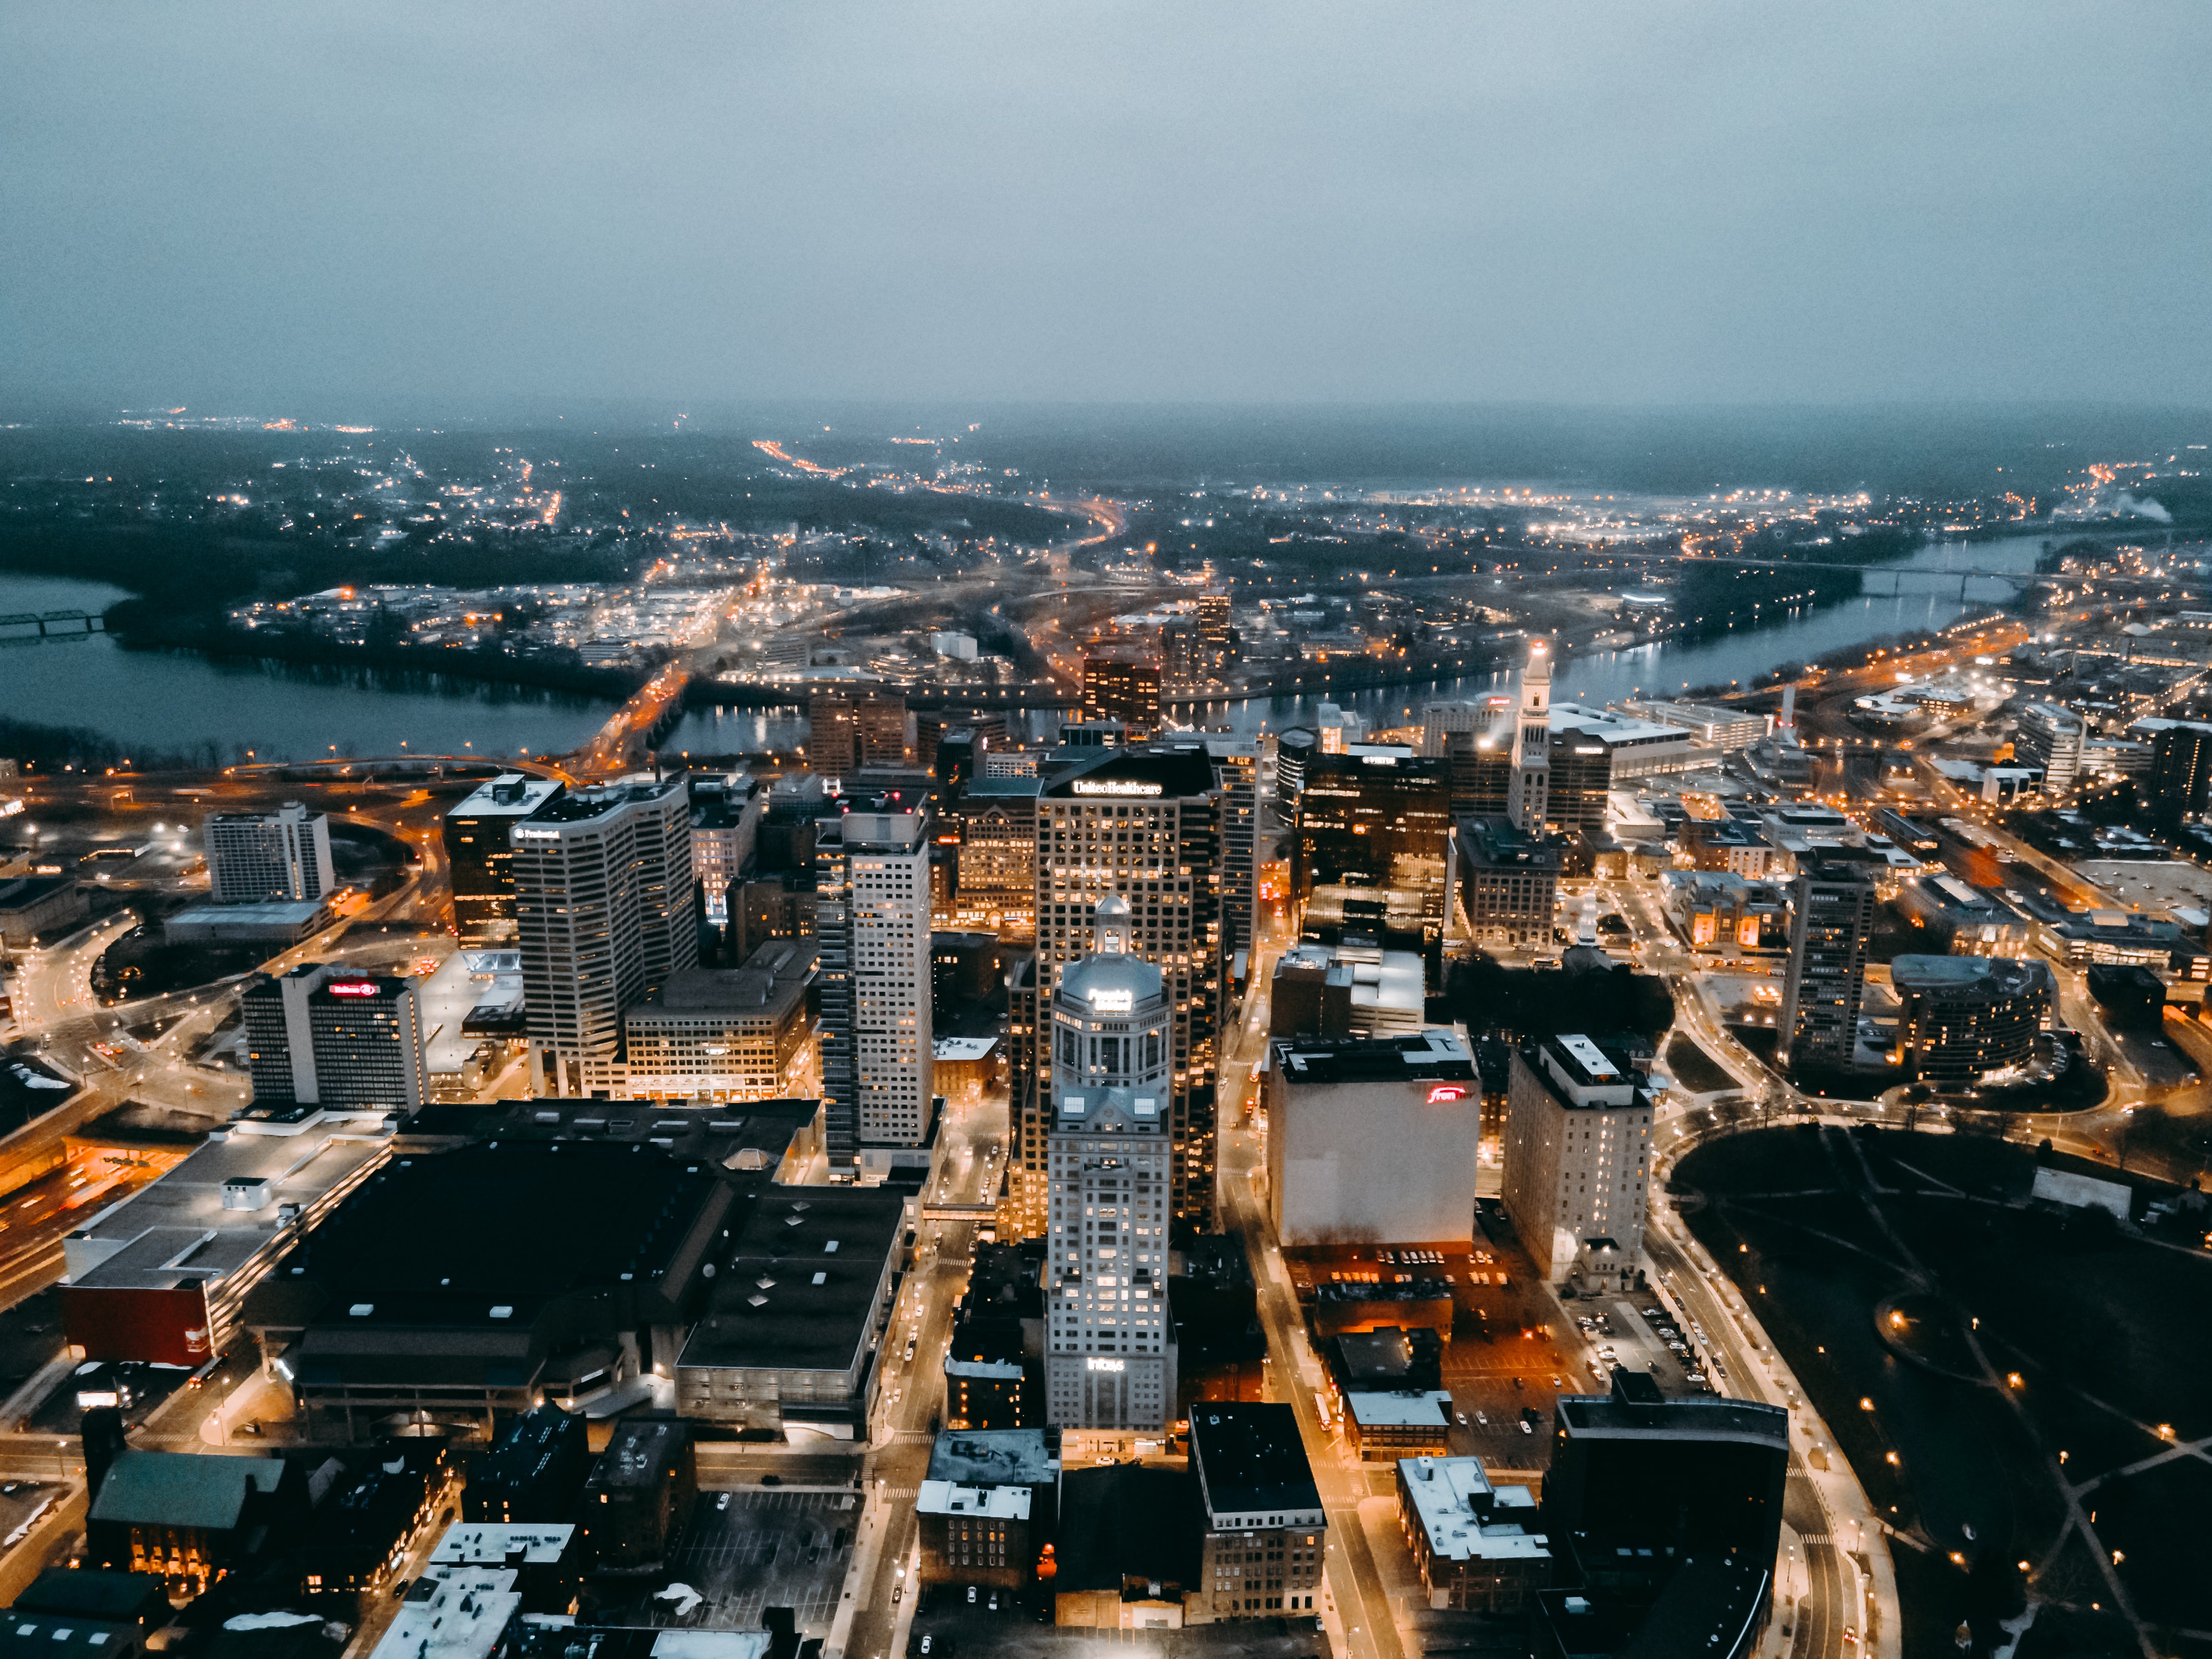 rivers, cities, city, building, lights, view from above, horizon